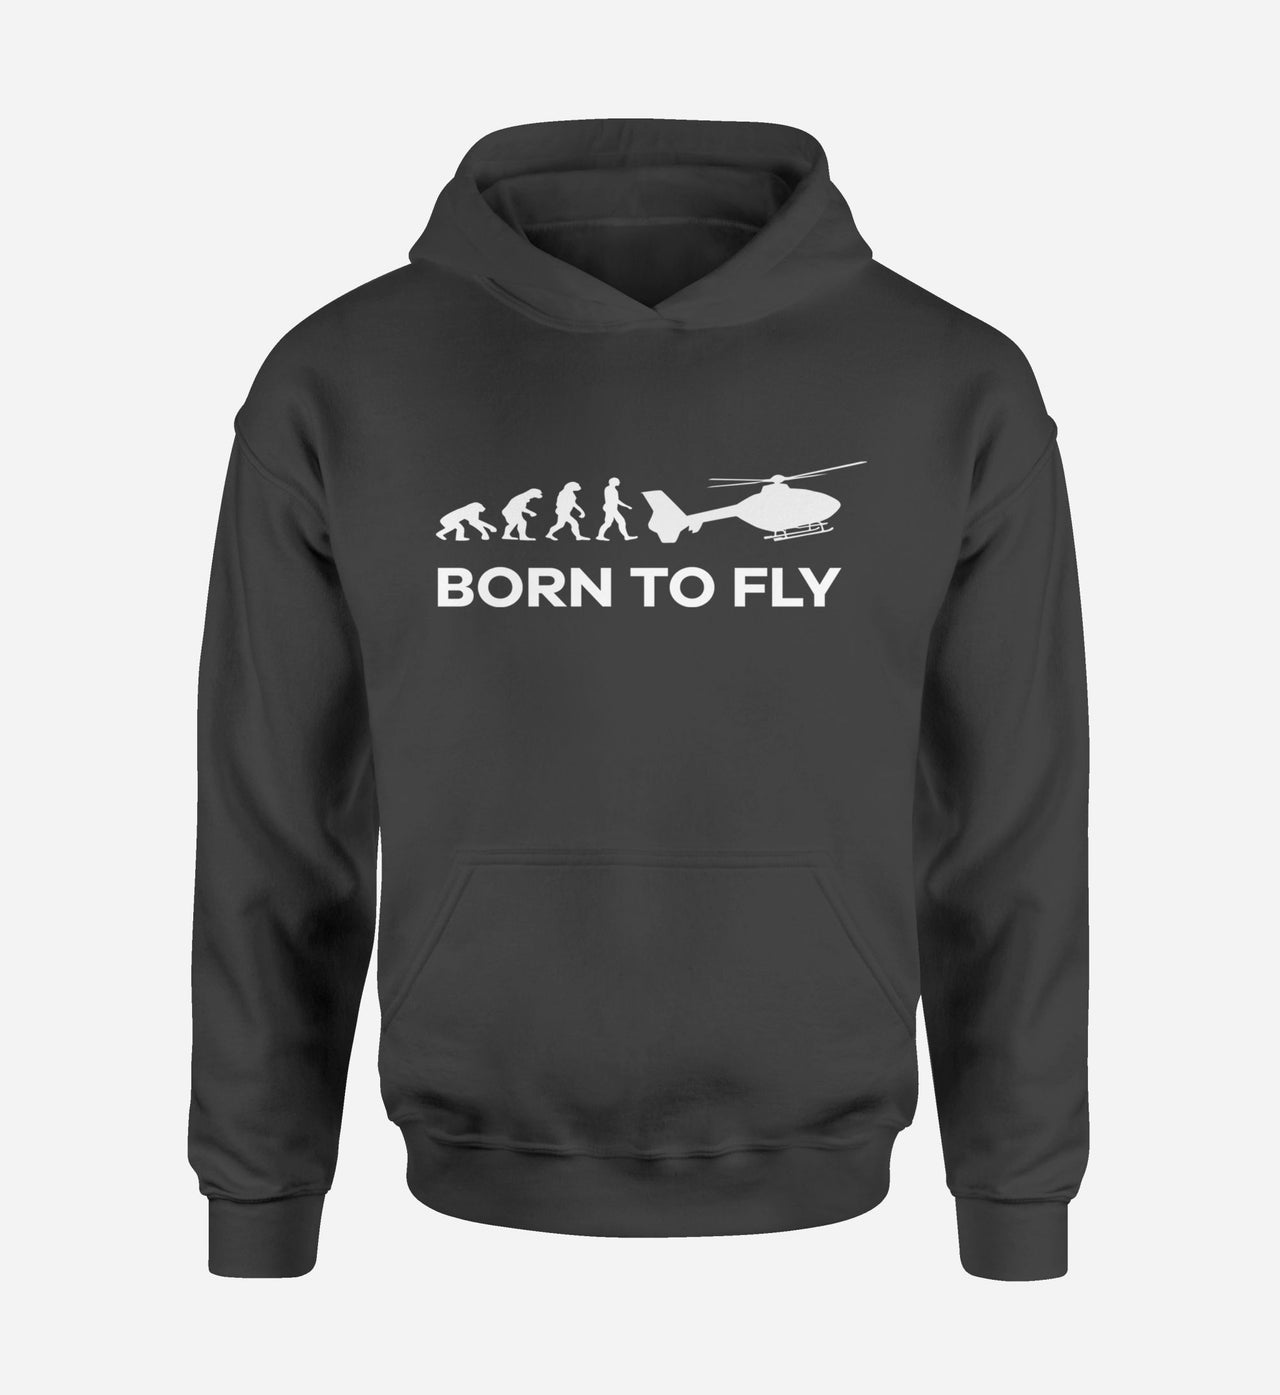 Born To Fly Helicopter Designed Hoodies